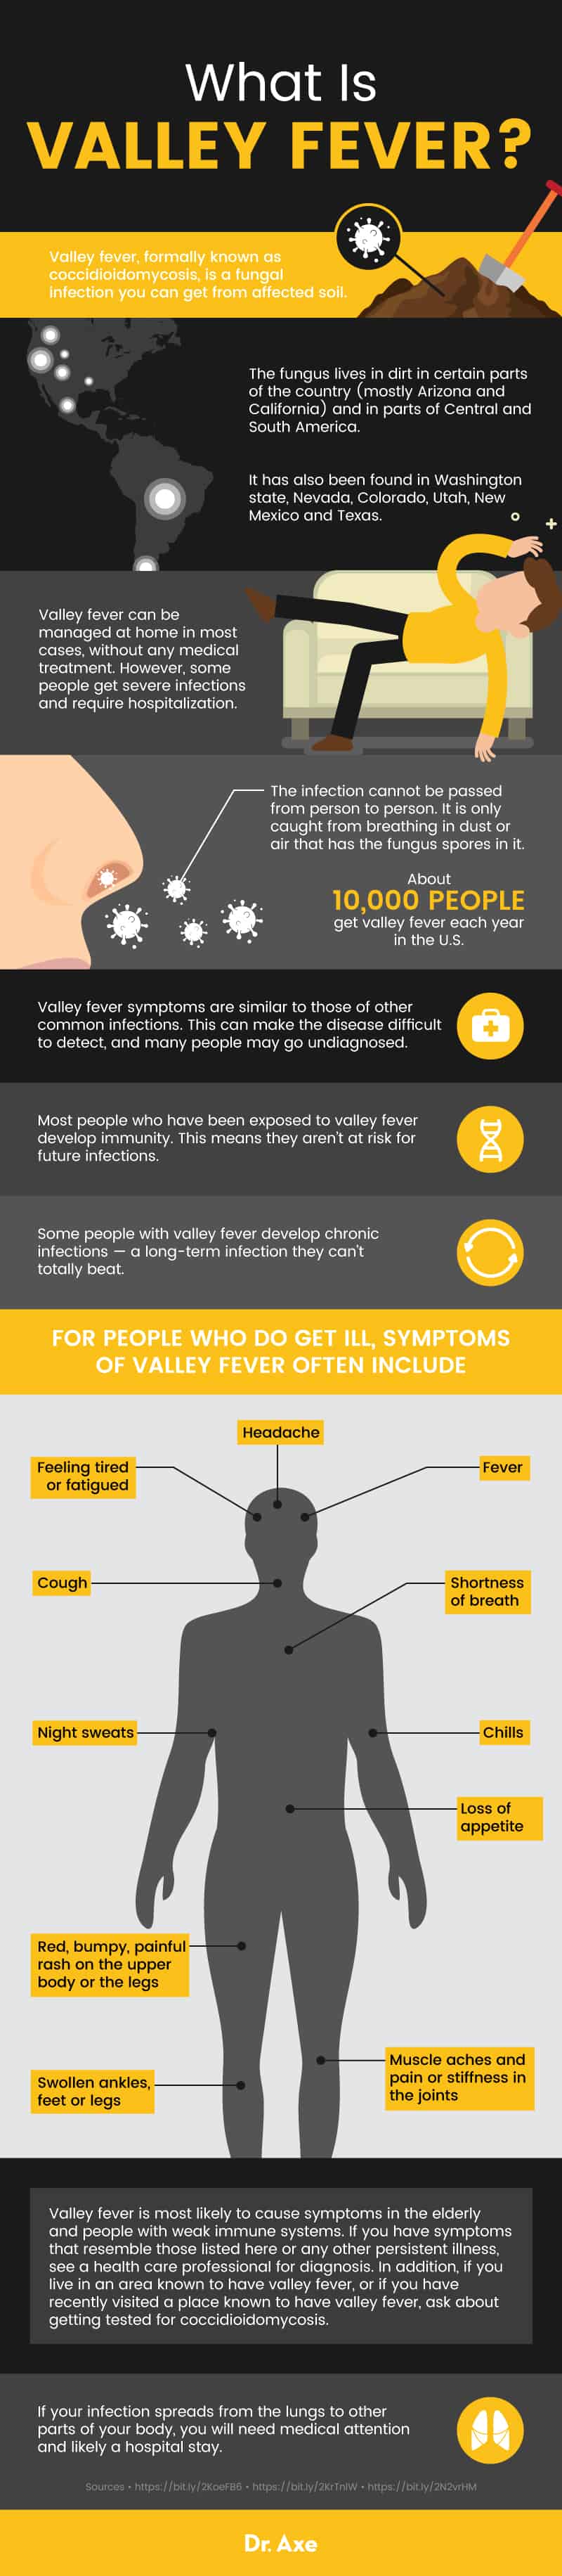 What Is Valley Fever? - Dr. Axe